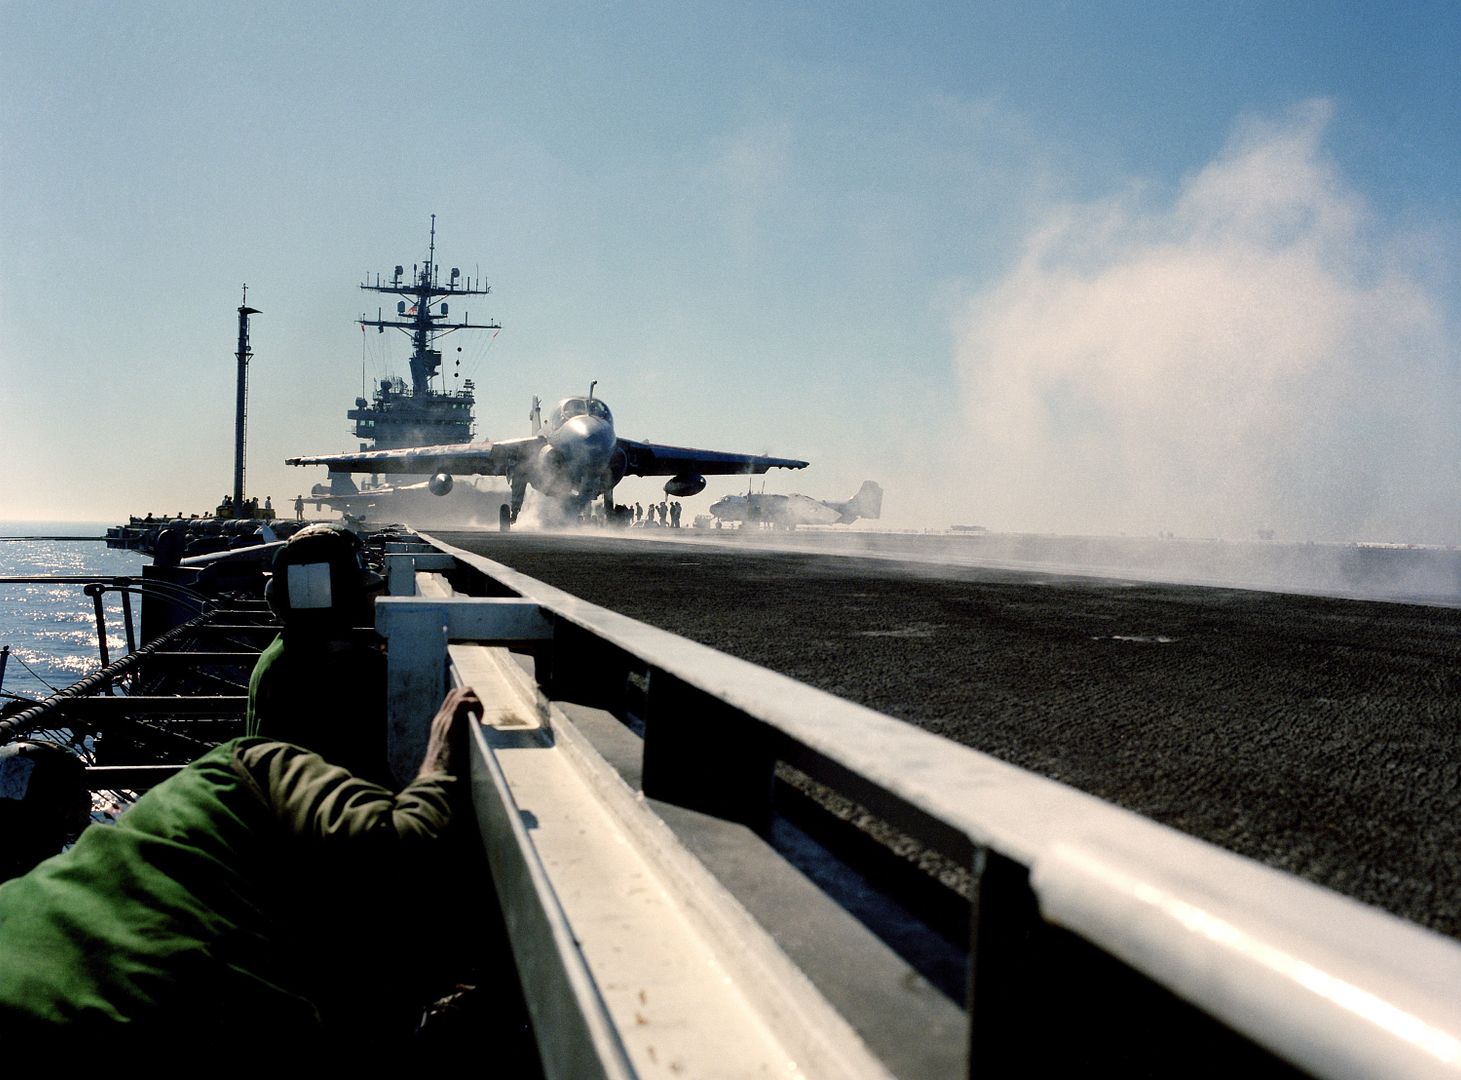 Flight Deck Crewman On A Catwalk Lower Their Heads As An A 6E Intruder Aircraft Is Launched From The Nuclear Powered Aircraft Carrier USS CARL VINSON